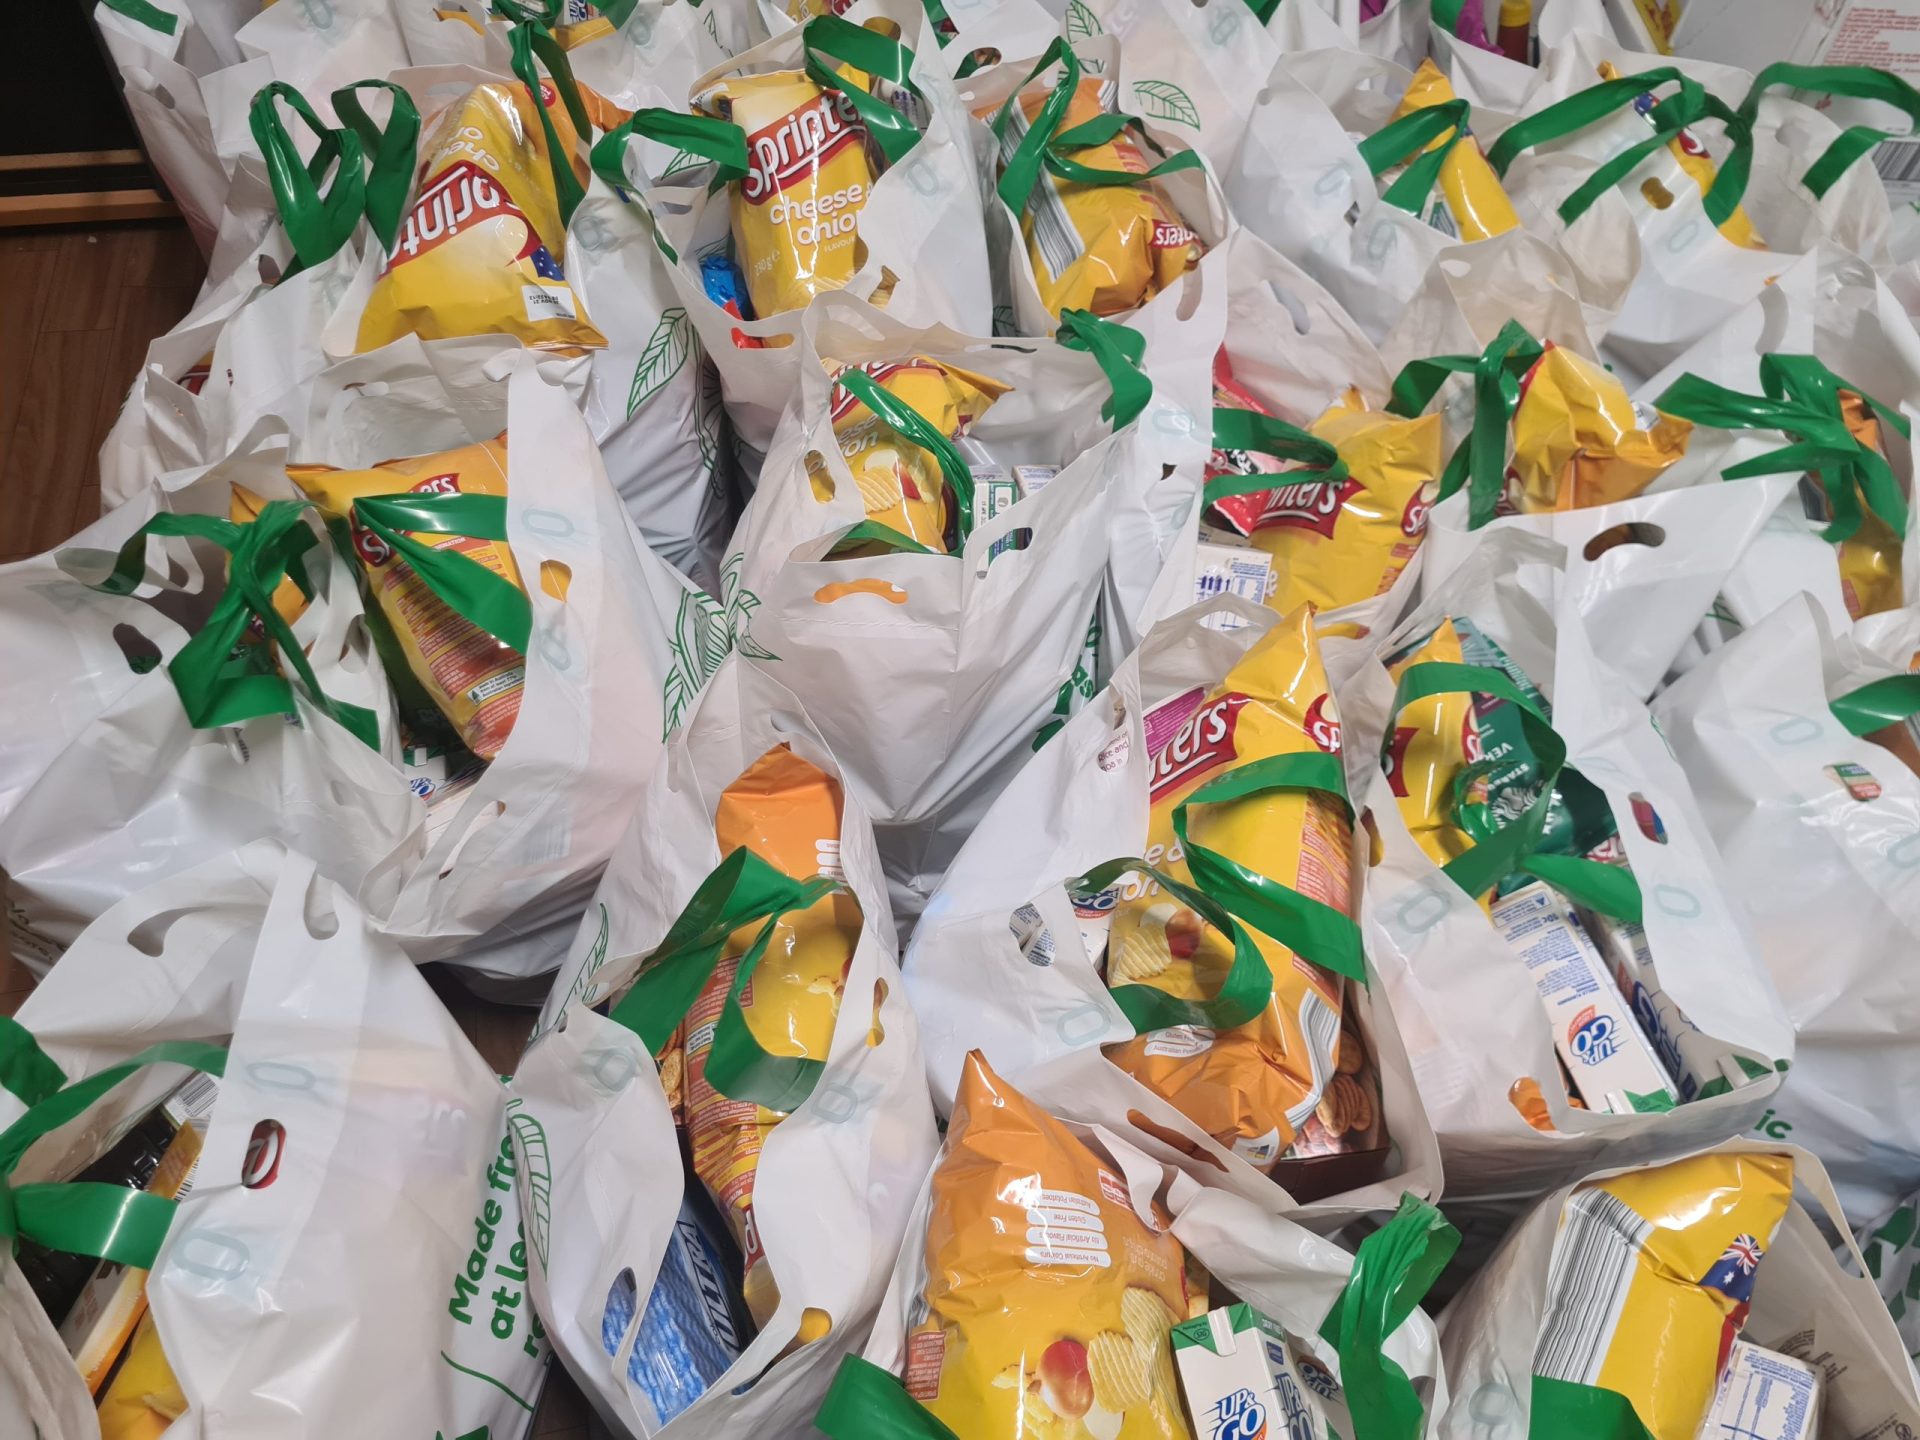 grocery bags filled with food products